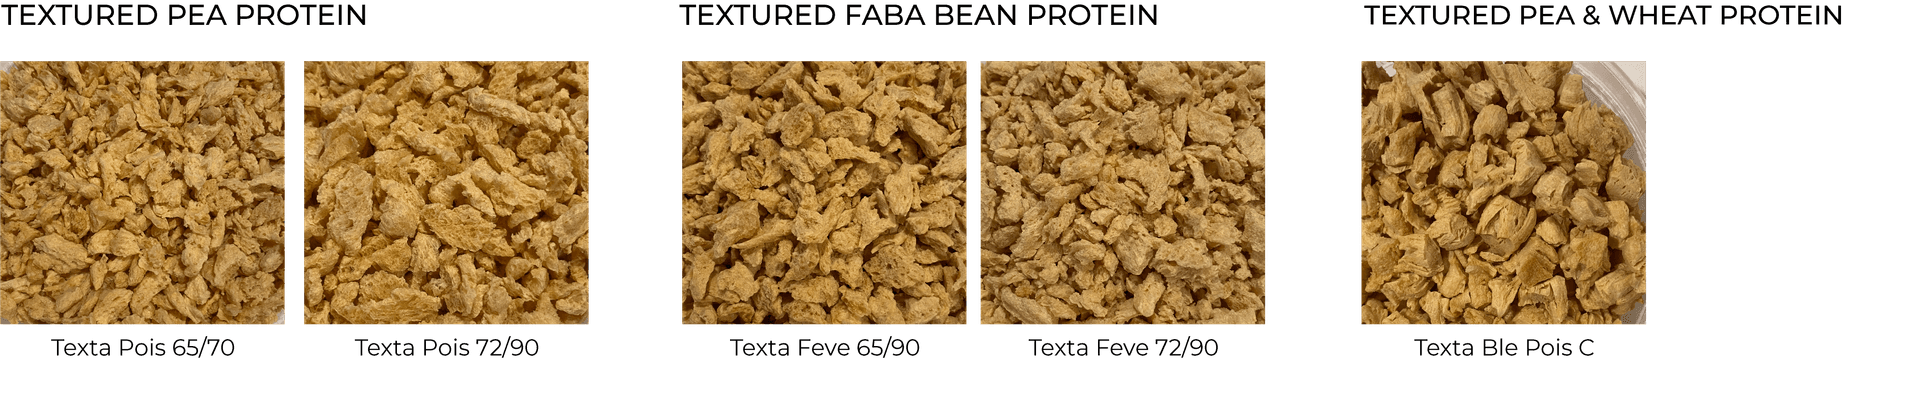 Textured Vegetable Proteins Product Range